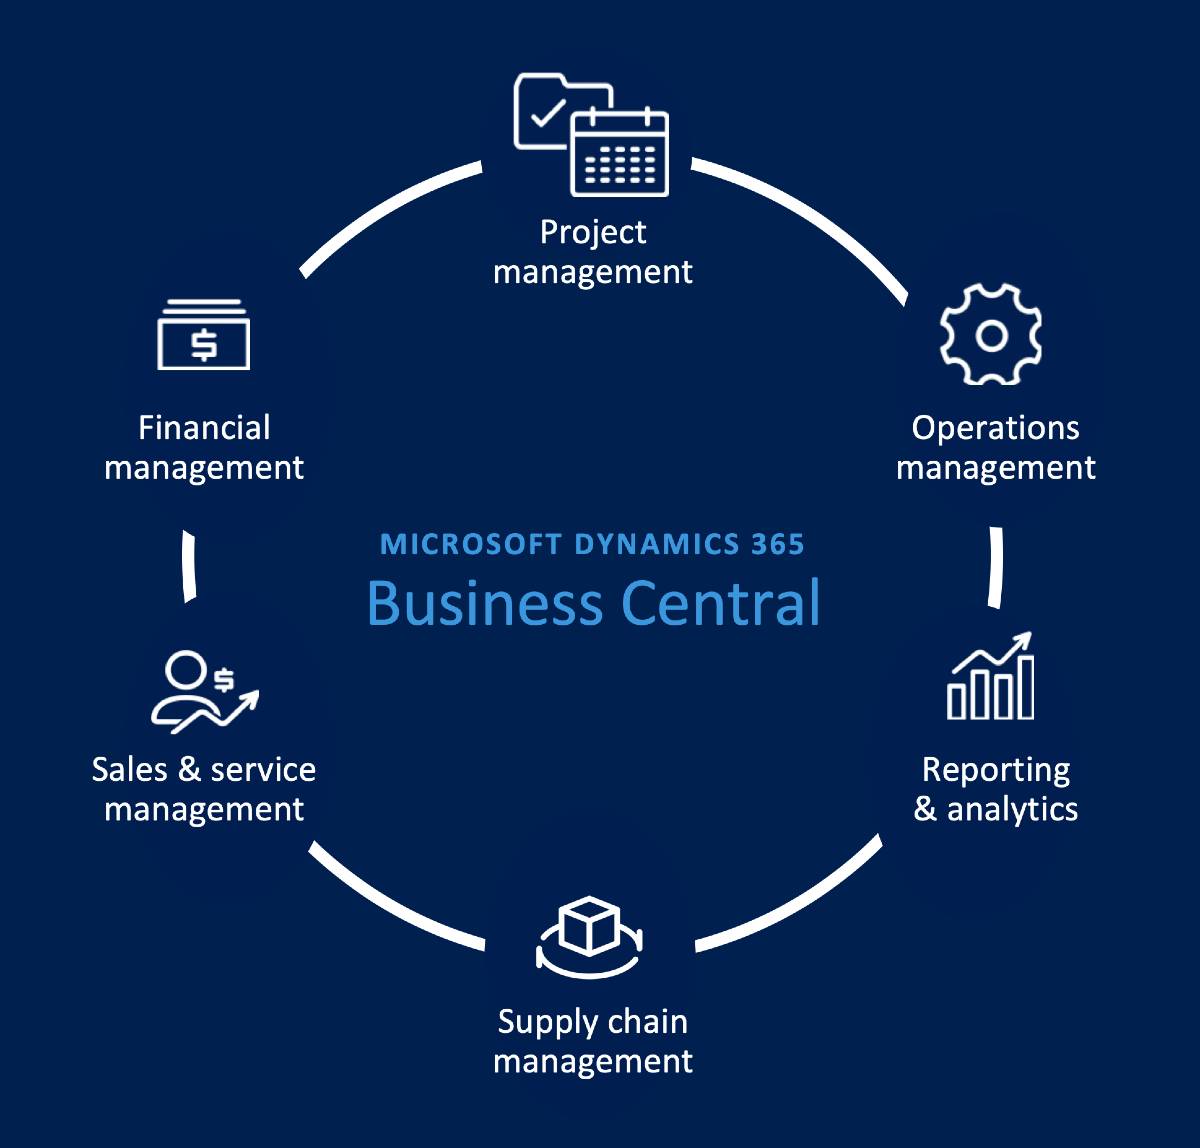 business-central-functionality